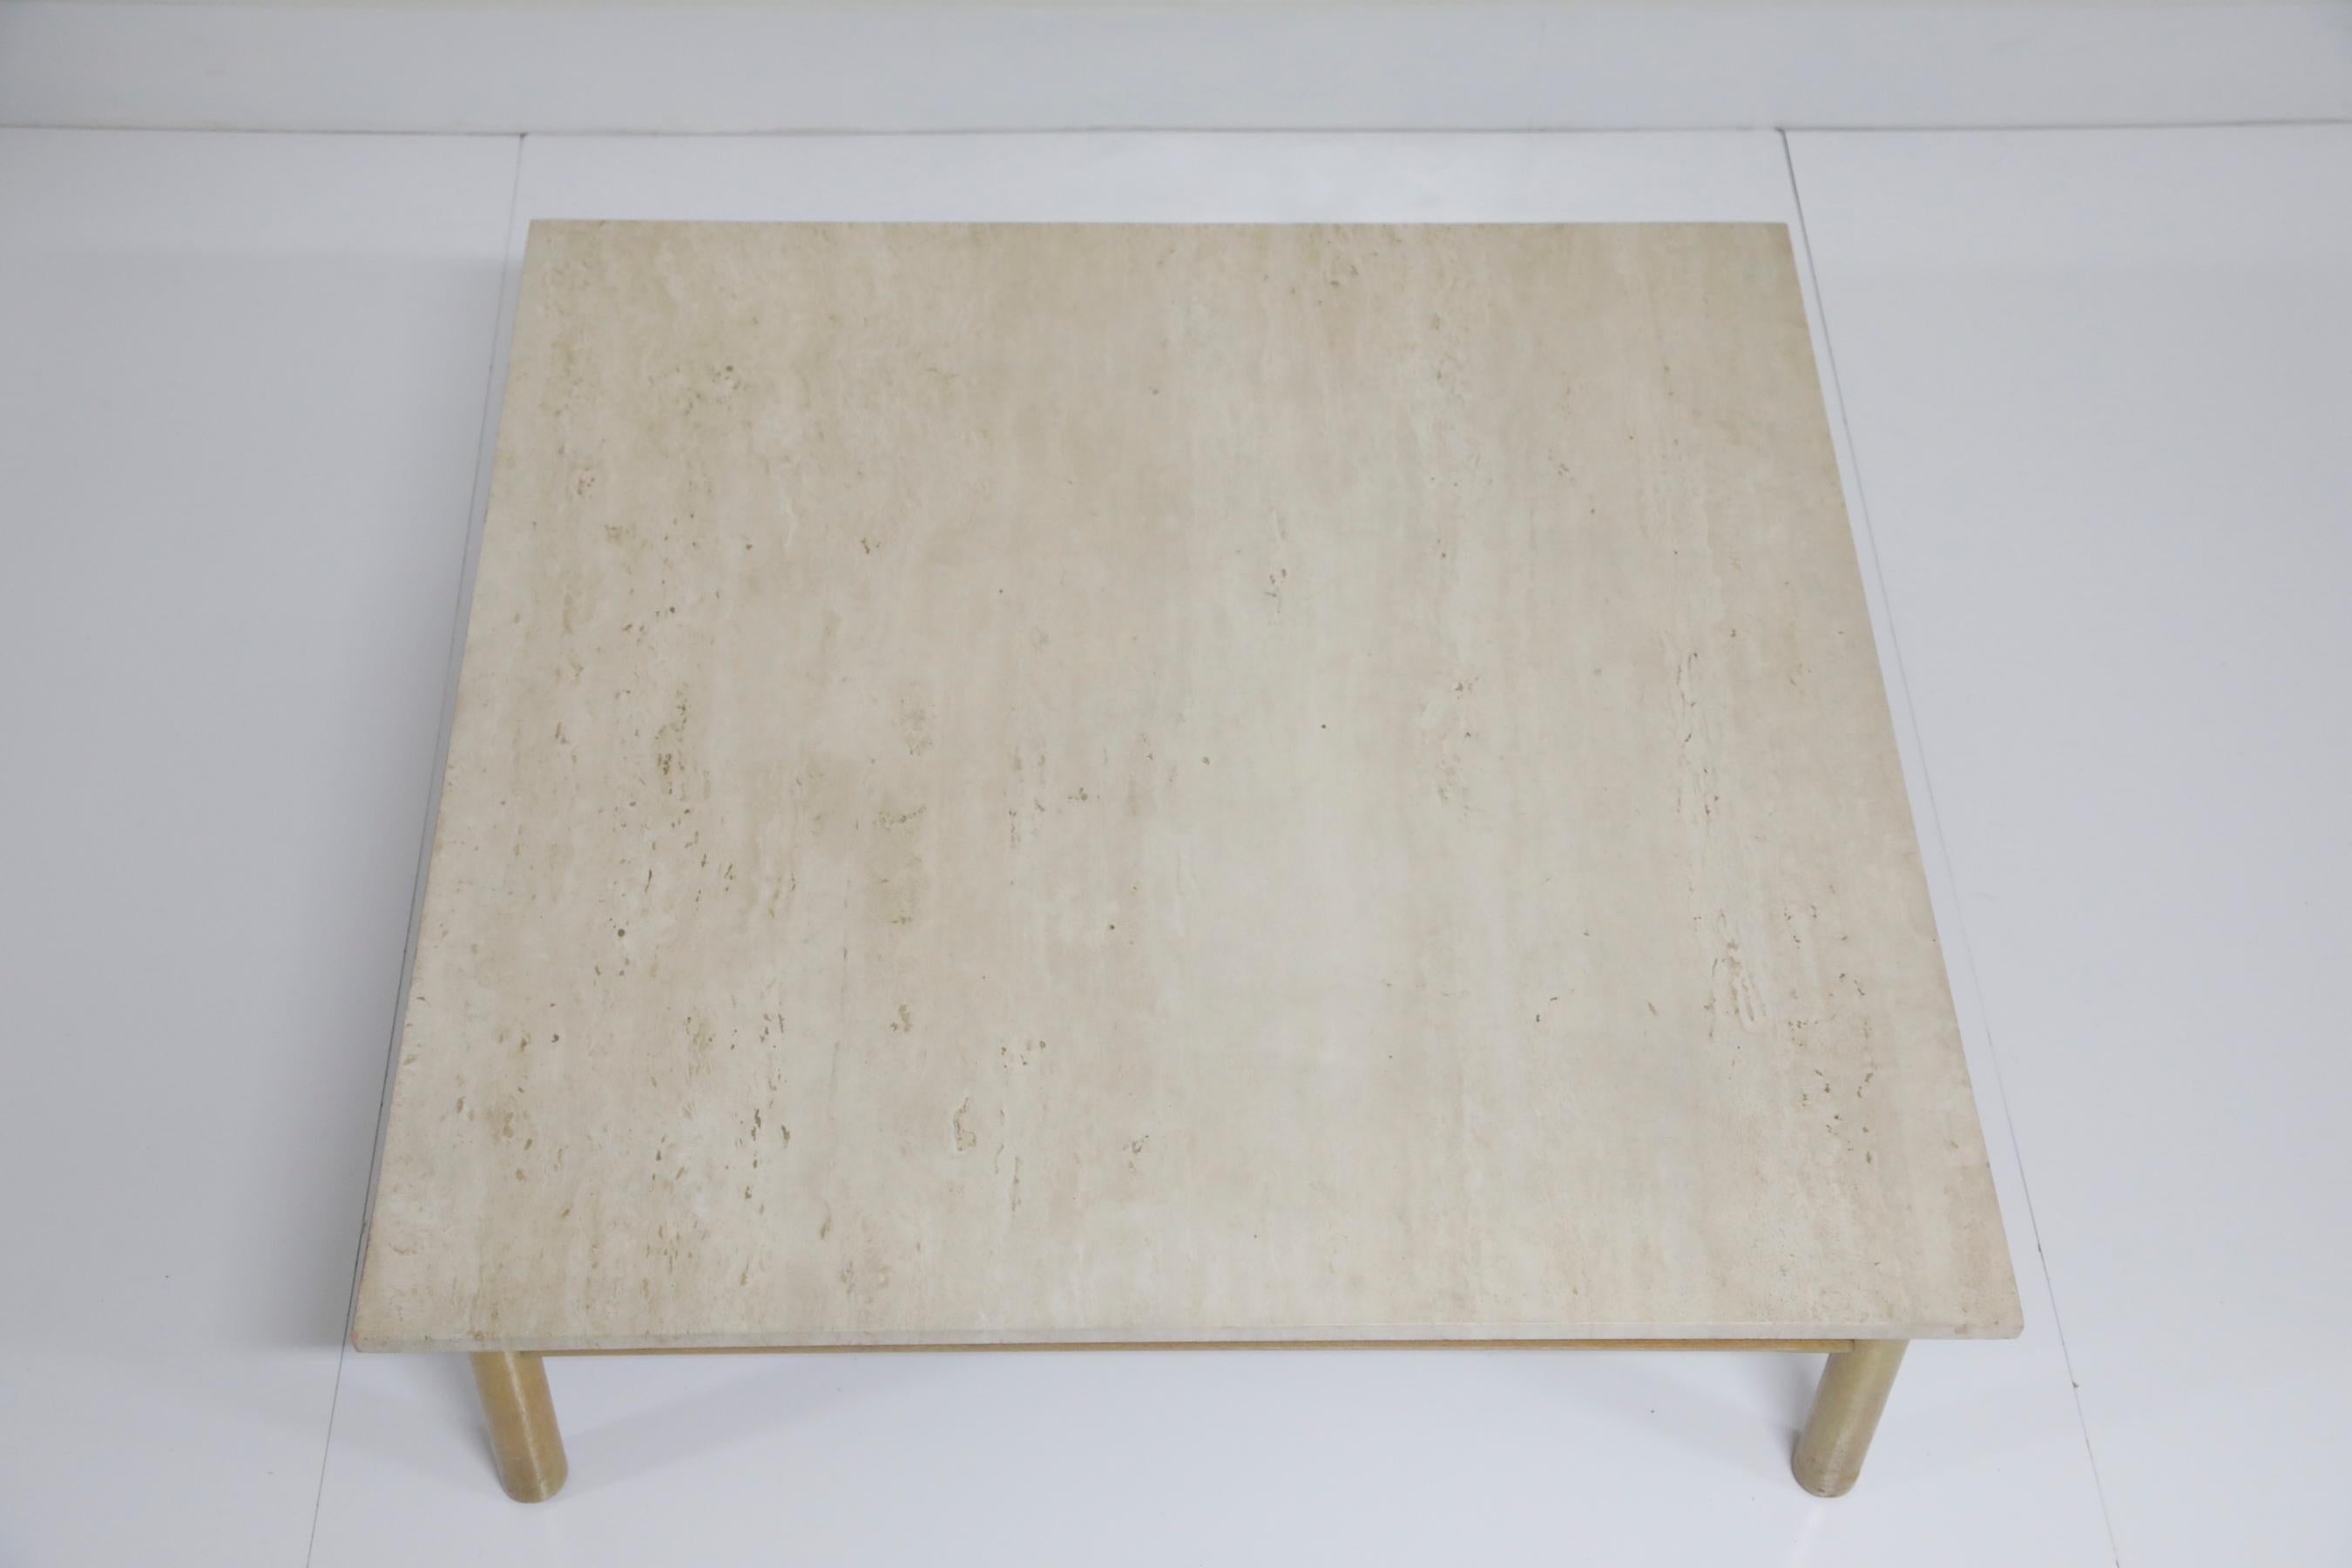 American Large Travertine Cocktail Table by T.H. Robsjohn Gibbings for Widdicomb, Signed